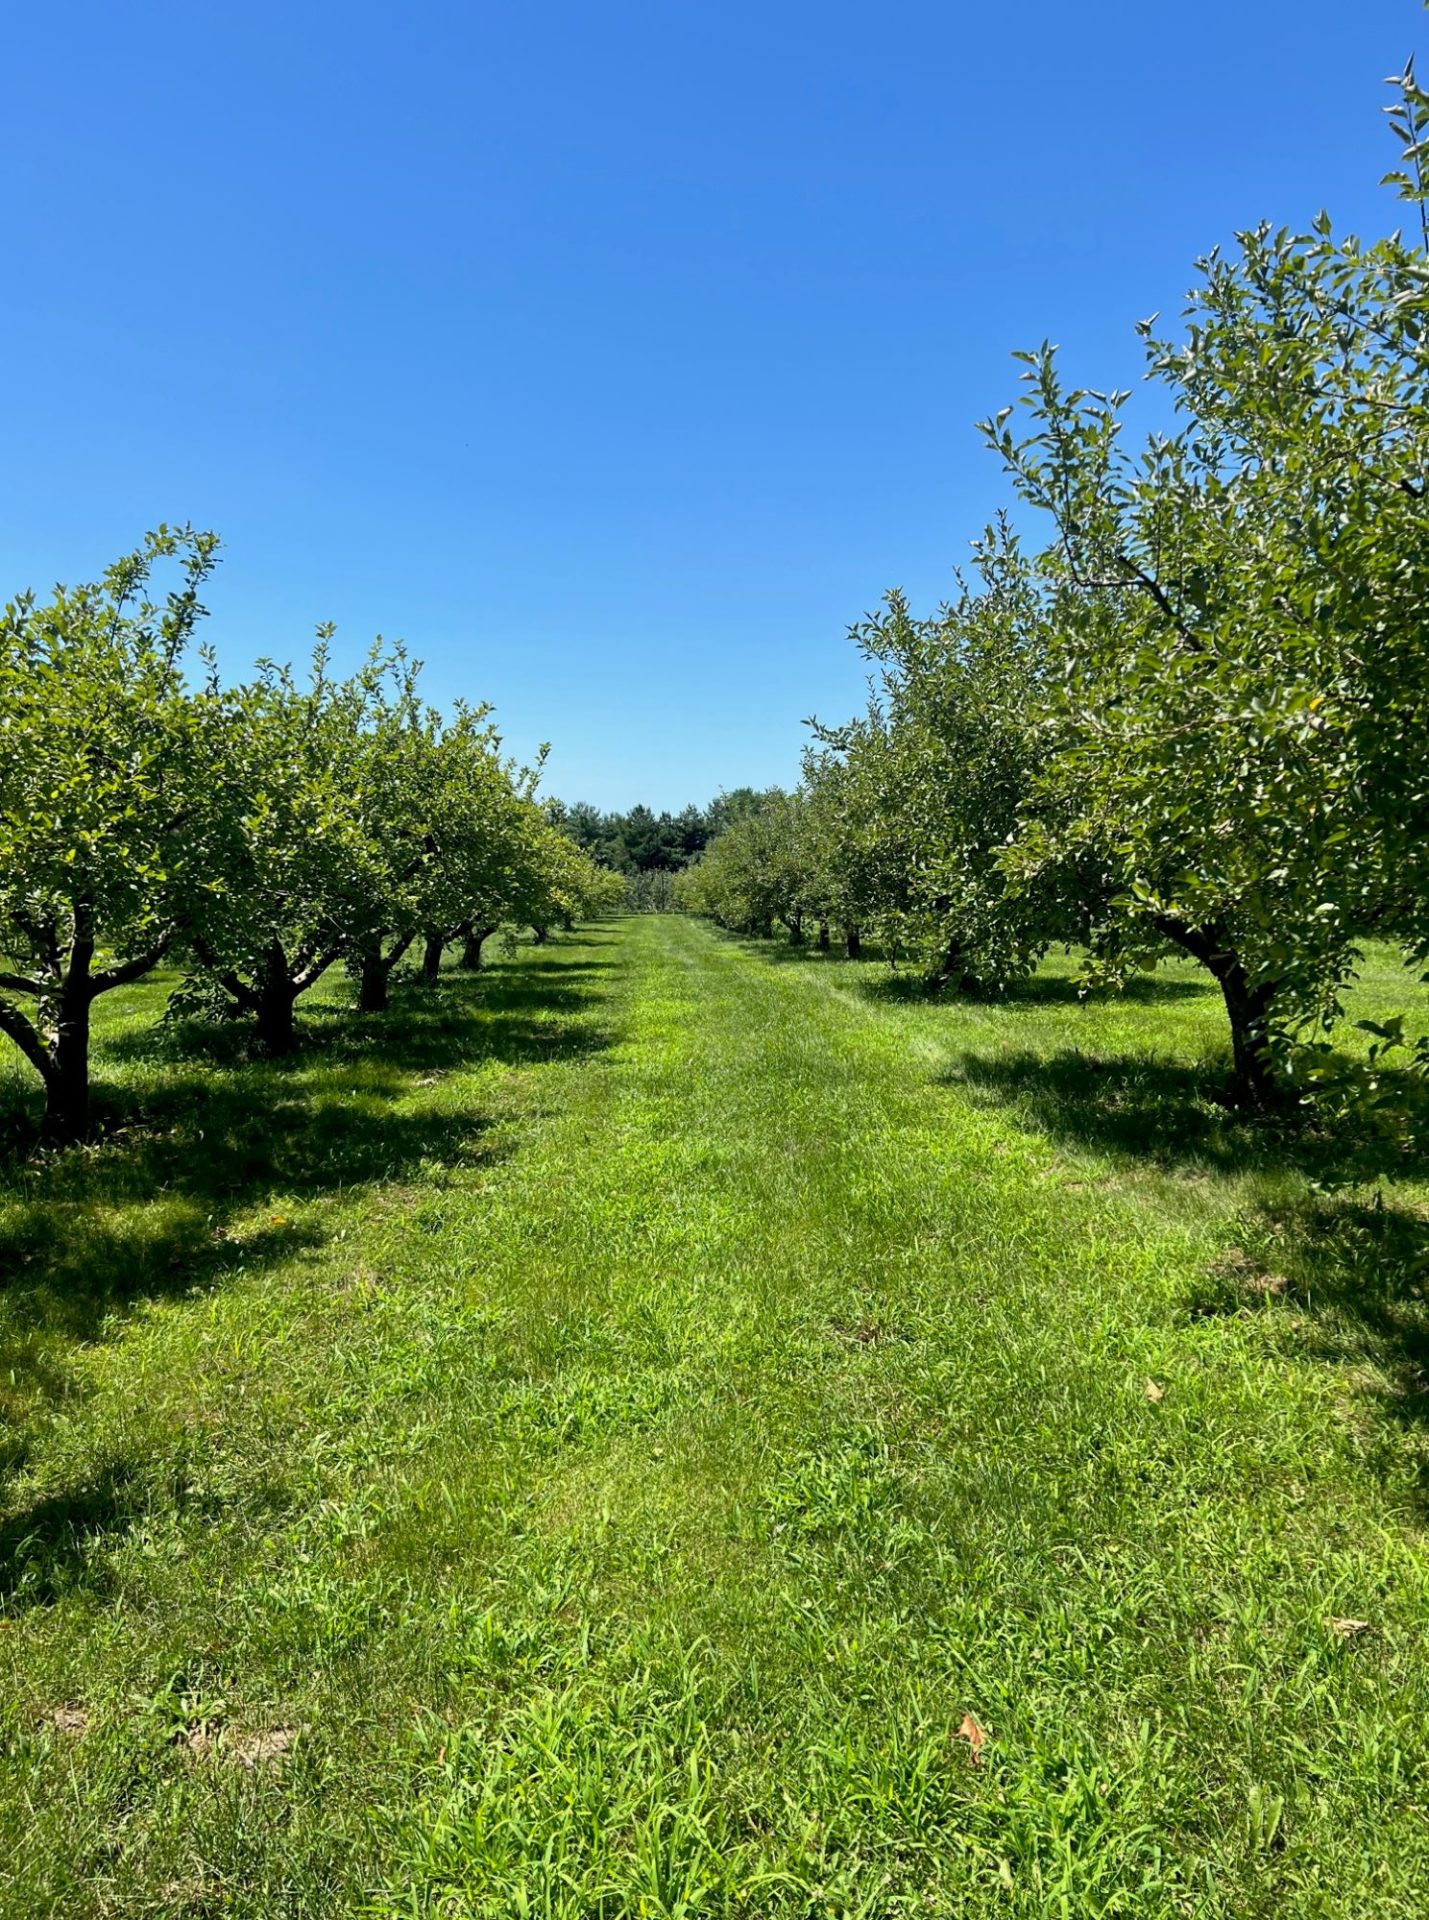 A view down a row of fruit trees, with a grassy lane in between.